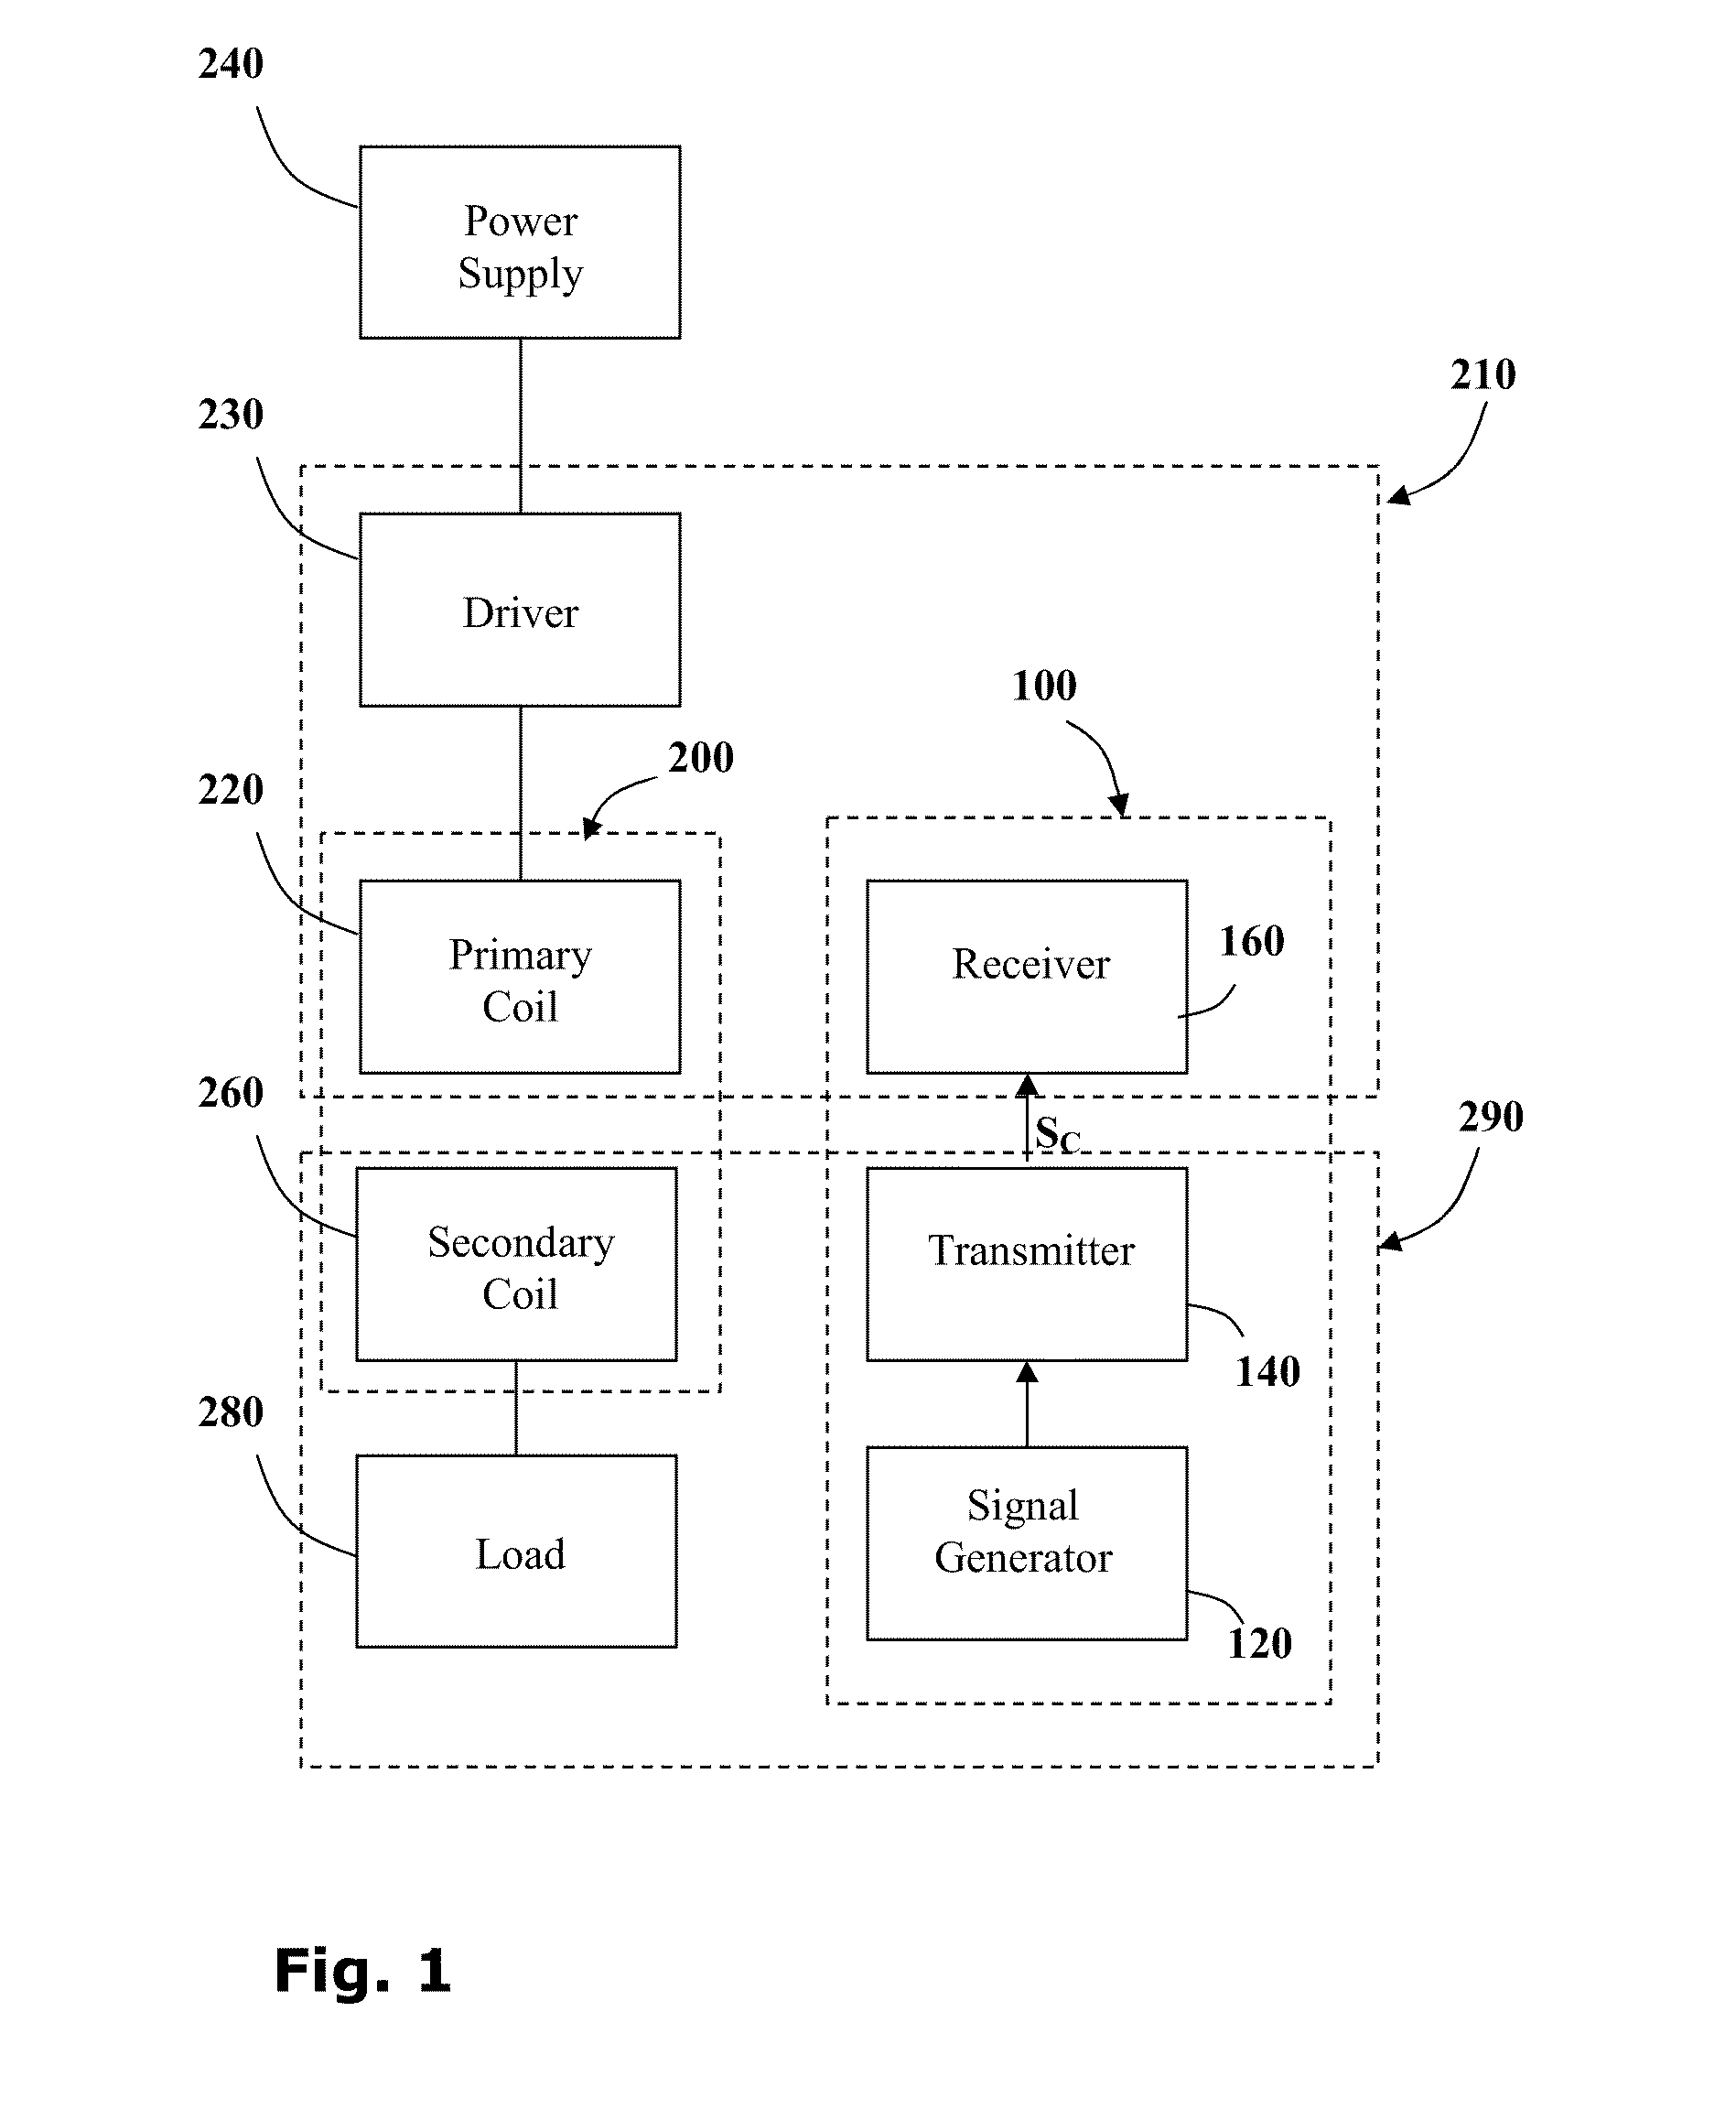 Efficiency monitor for inductive power transmission